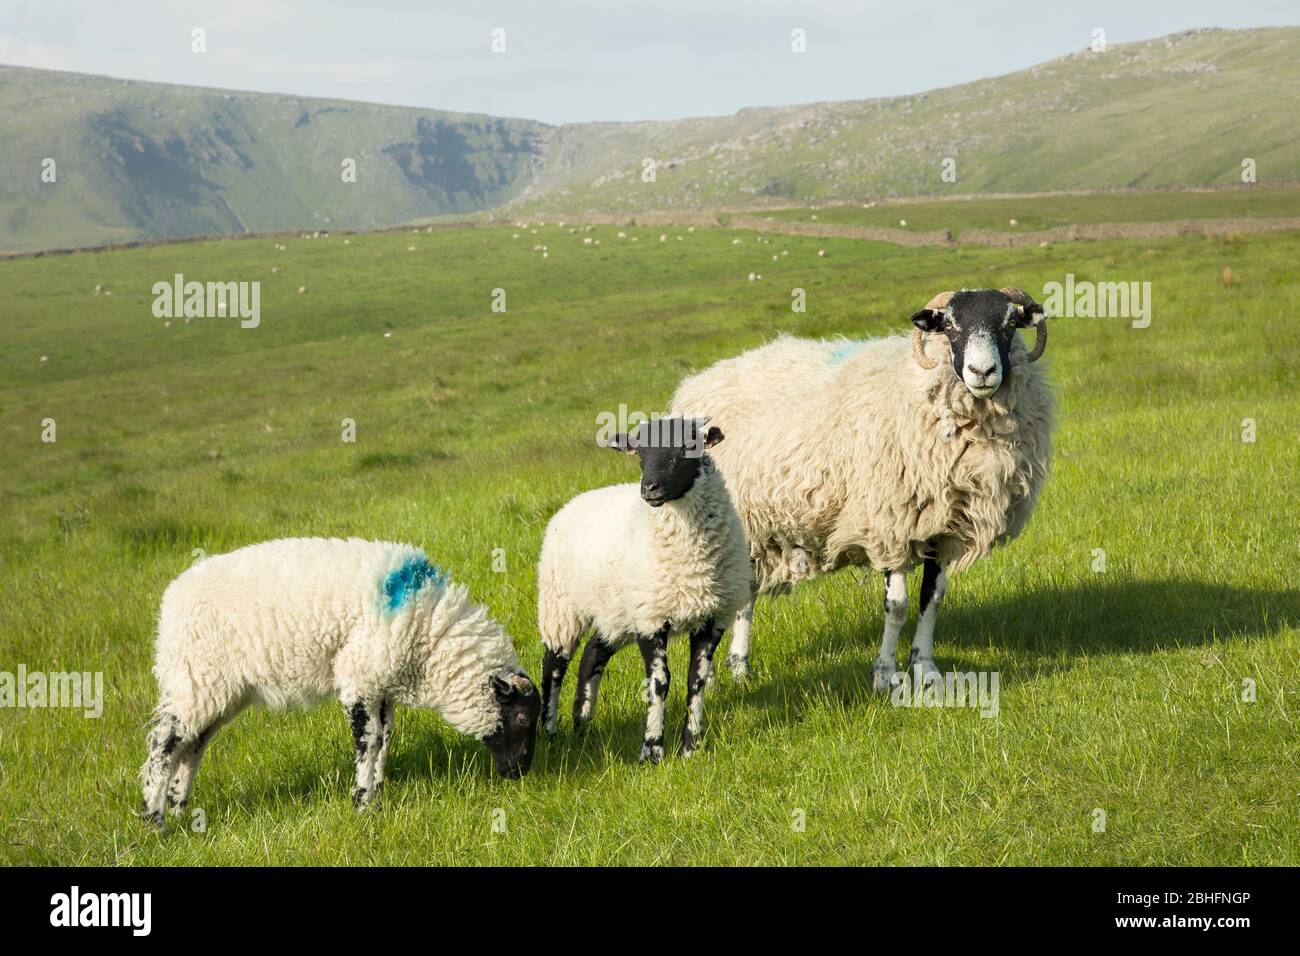 Ewe with her lambs in a field, sheep farming in Peak District, Derbyshire, UK Stock Photo